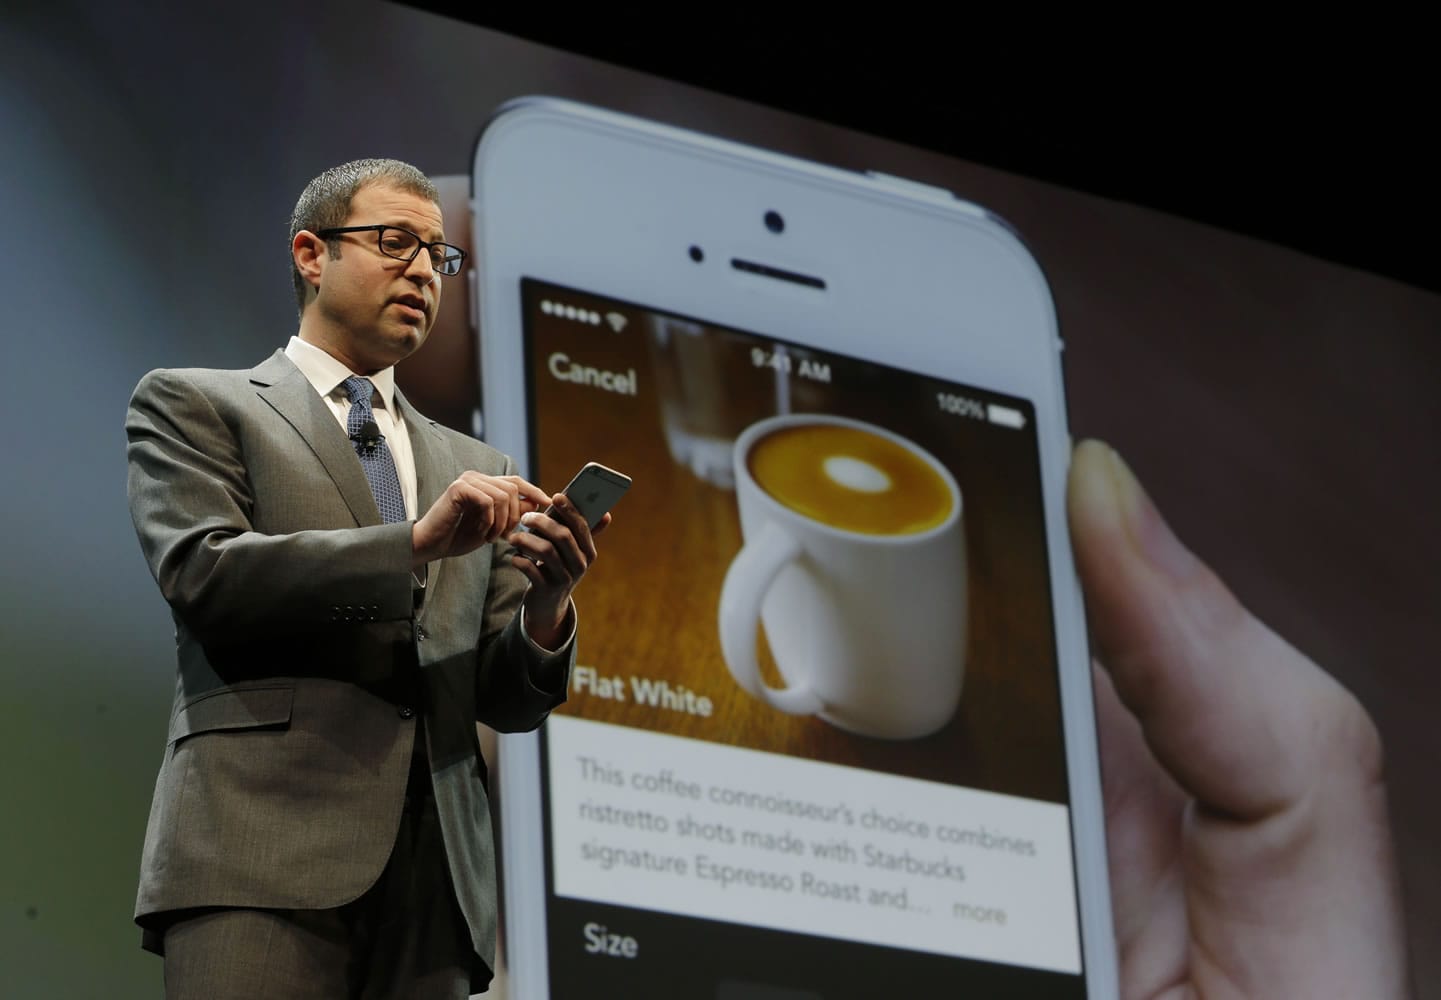 Adam Brotman, Starbucks chief digital officer, talks about the company's new mobile ordering app at Starbucks Coffee Company's annual shareholders meeting in May in Seattle. The Seattle-based coffee chain says its mobile app that lets people order and pay in advance will be available nationally starting Tuesday.